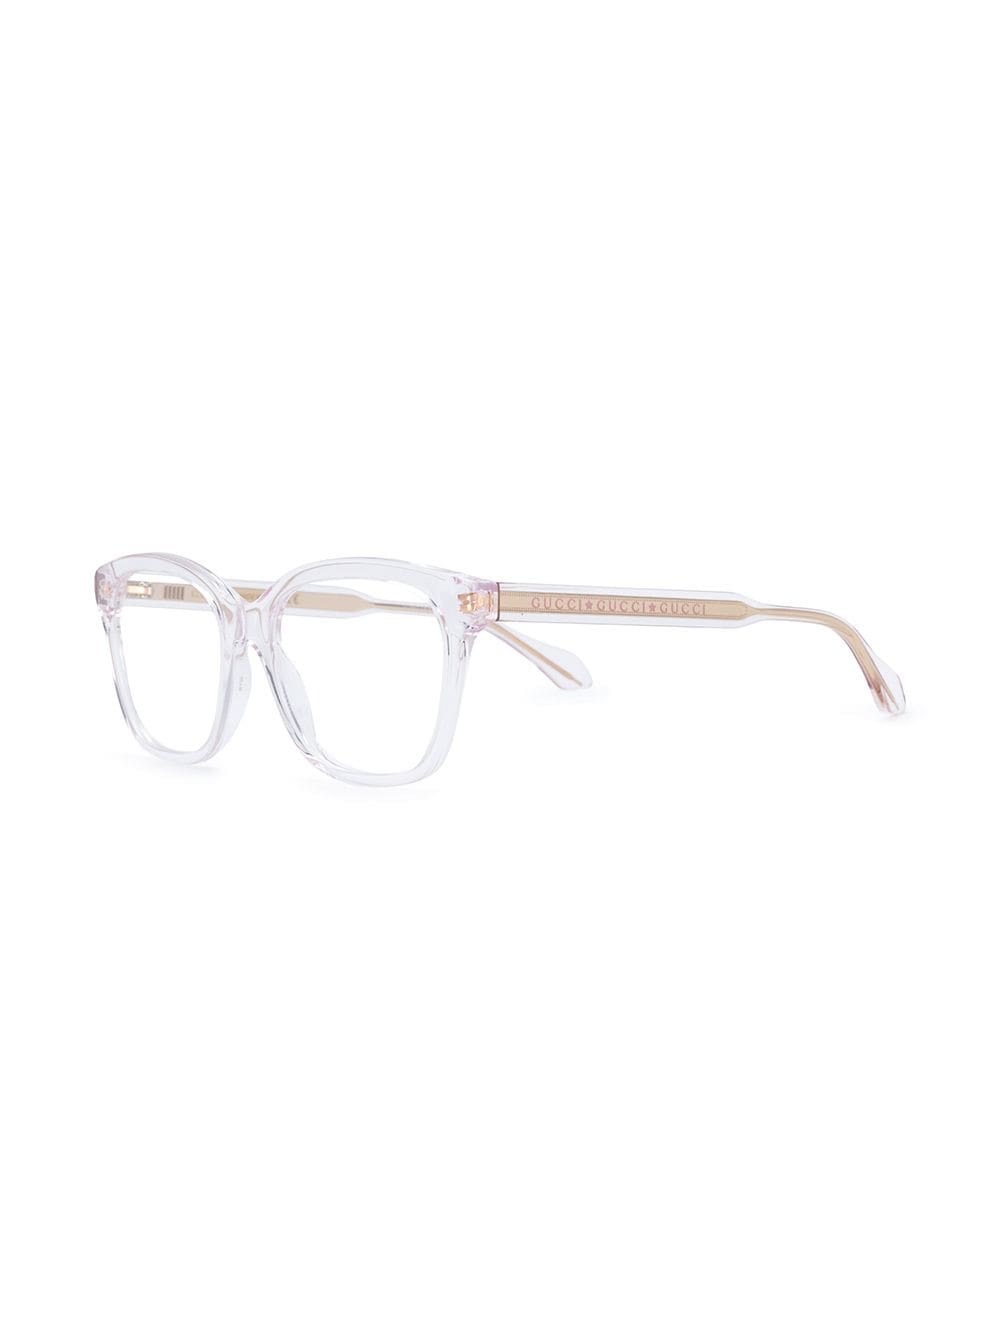 gucci clear frame glasses, OFF 71%,Buy!